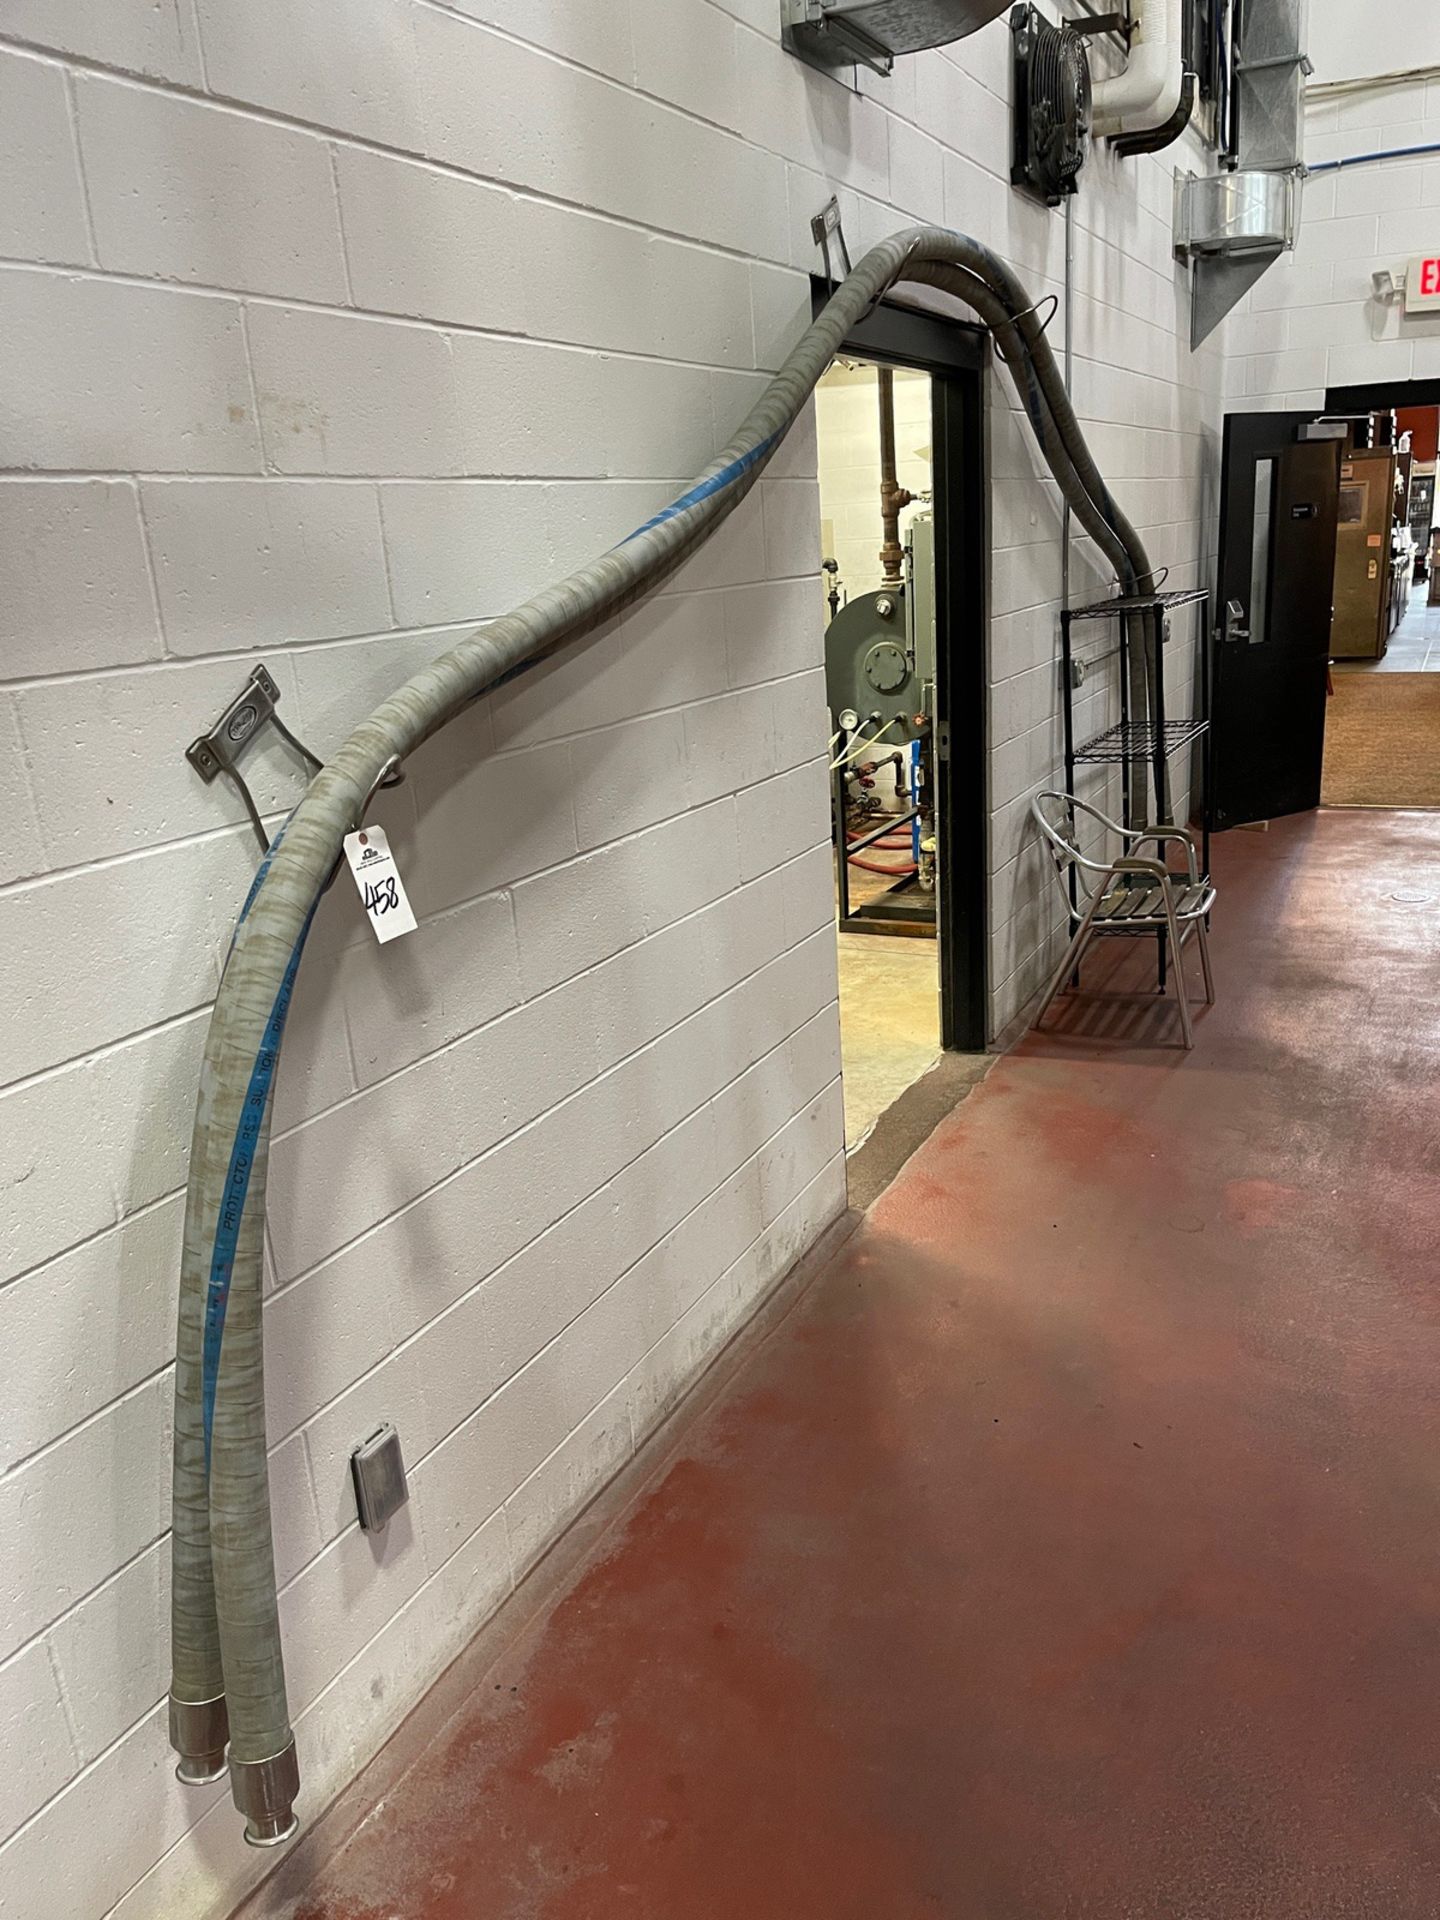 Lot of Brewery Hoses | Rig Fee $50